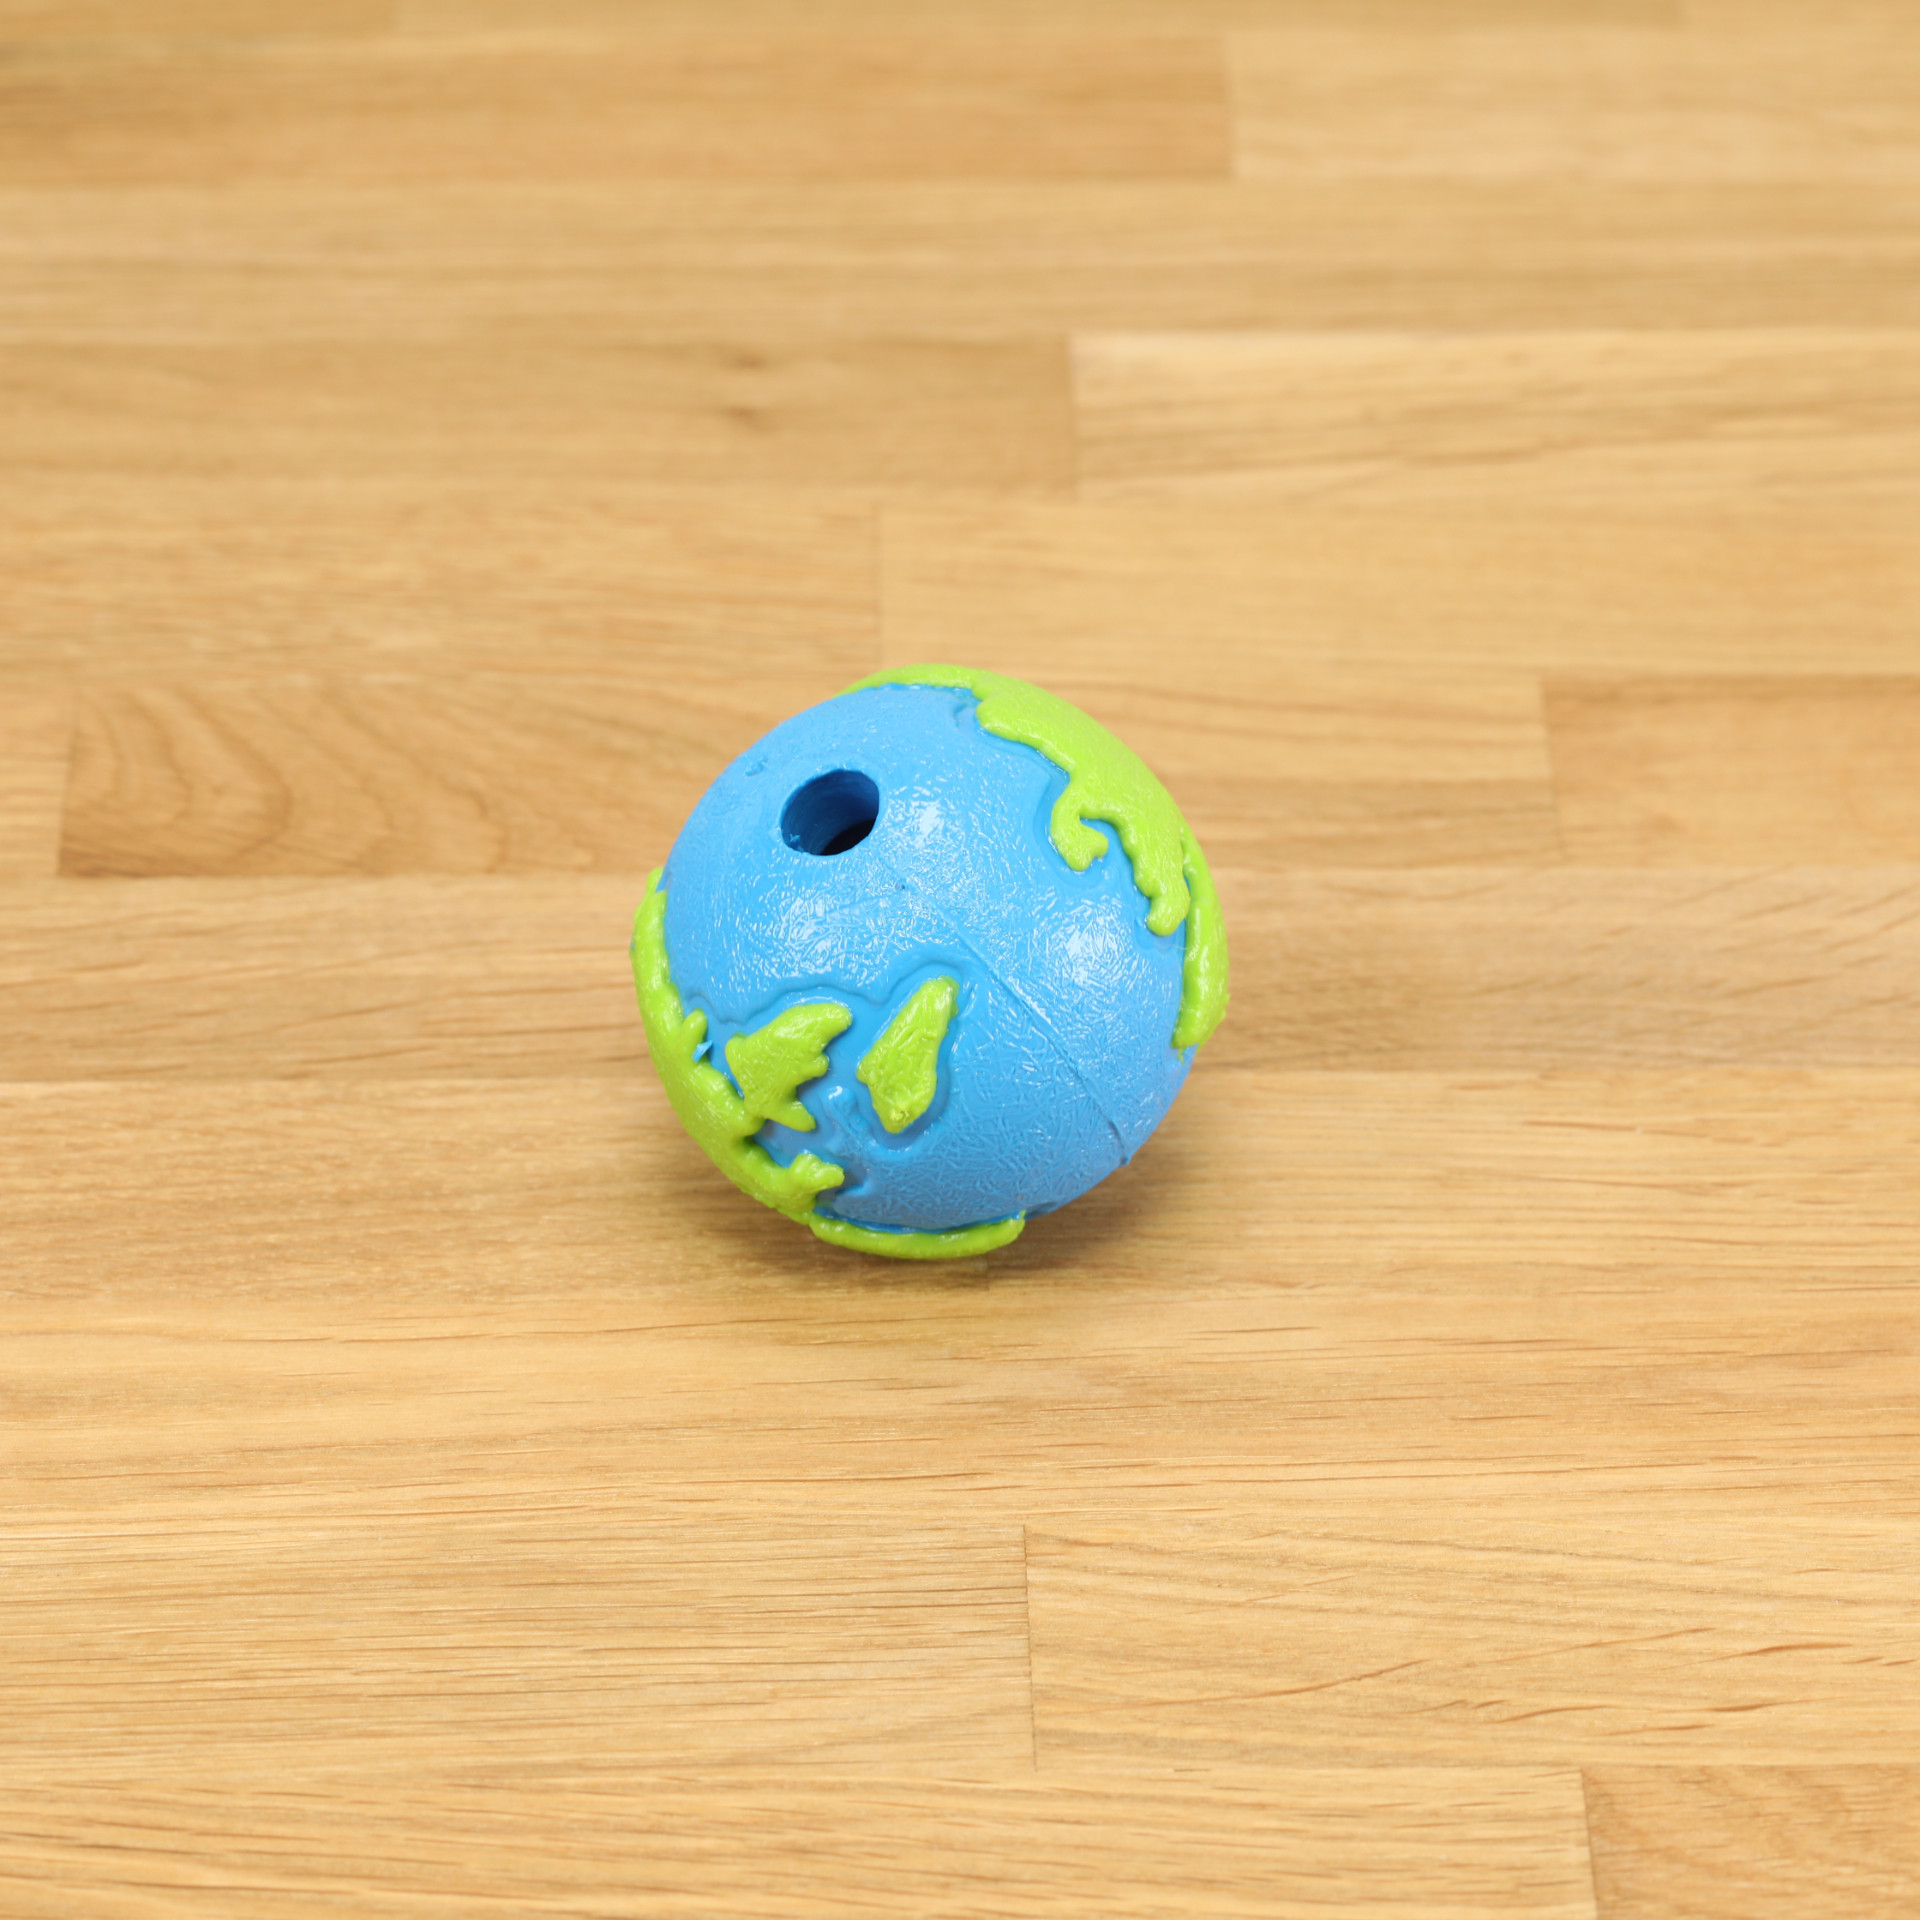 Dog toy Orbee ball blue/green